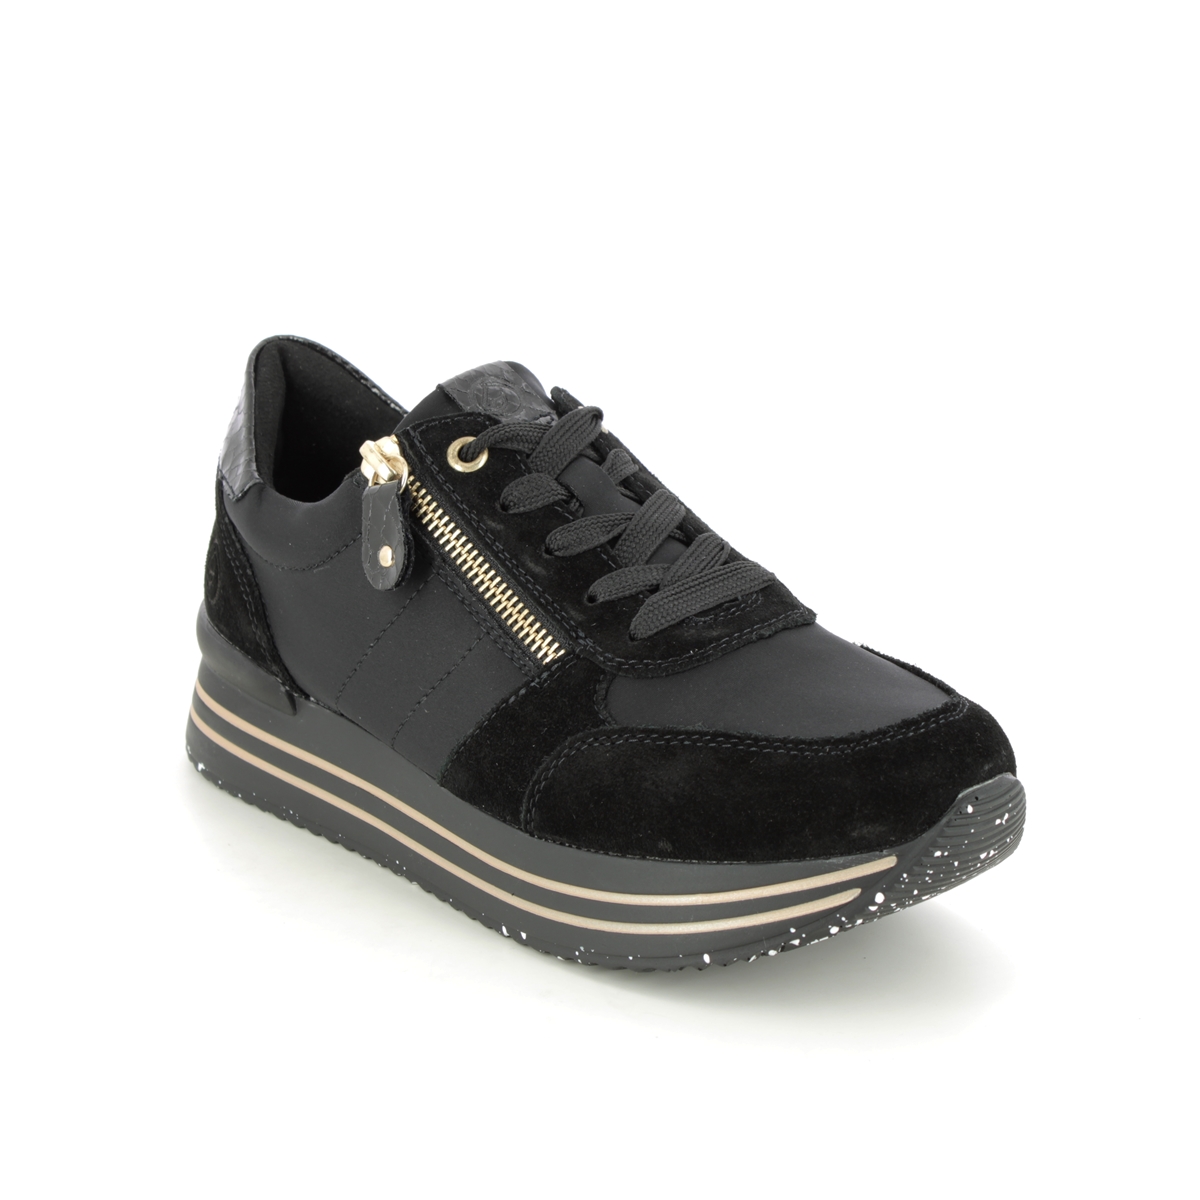 Remonte D1316-01 Ranger Black gold Womens trainers in a Plain Man-made in Size 40